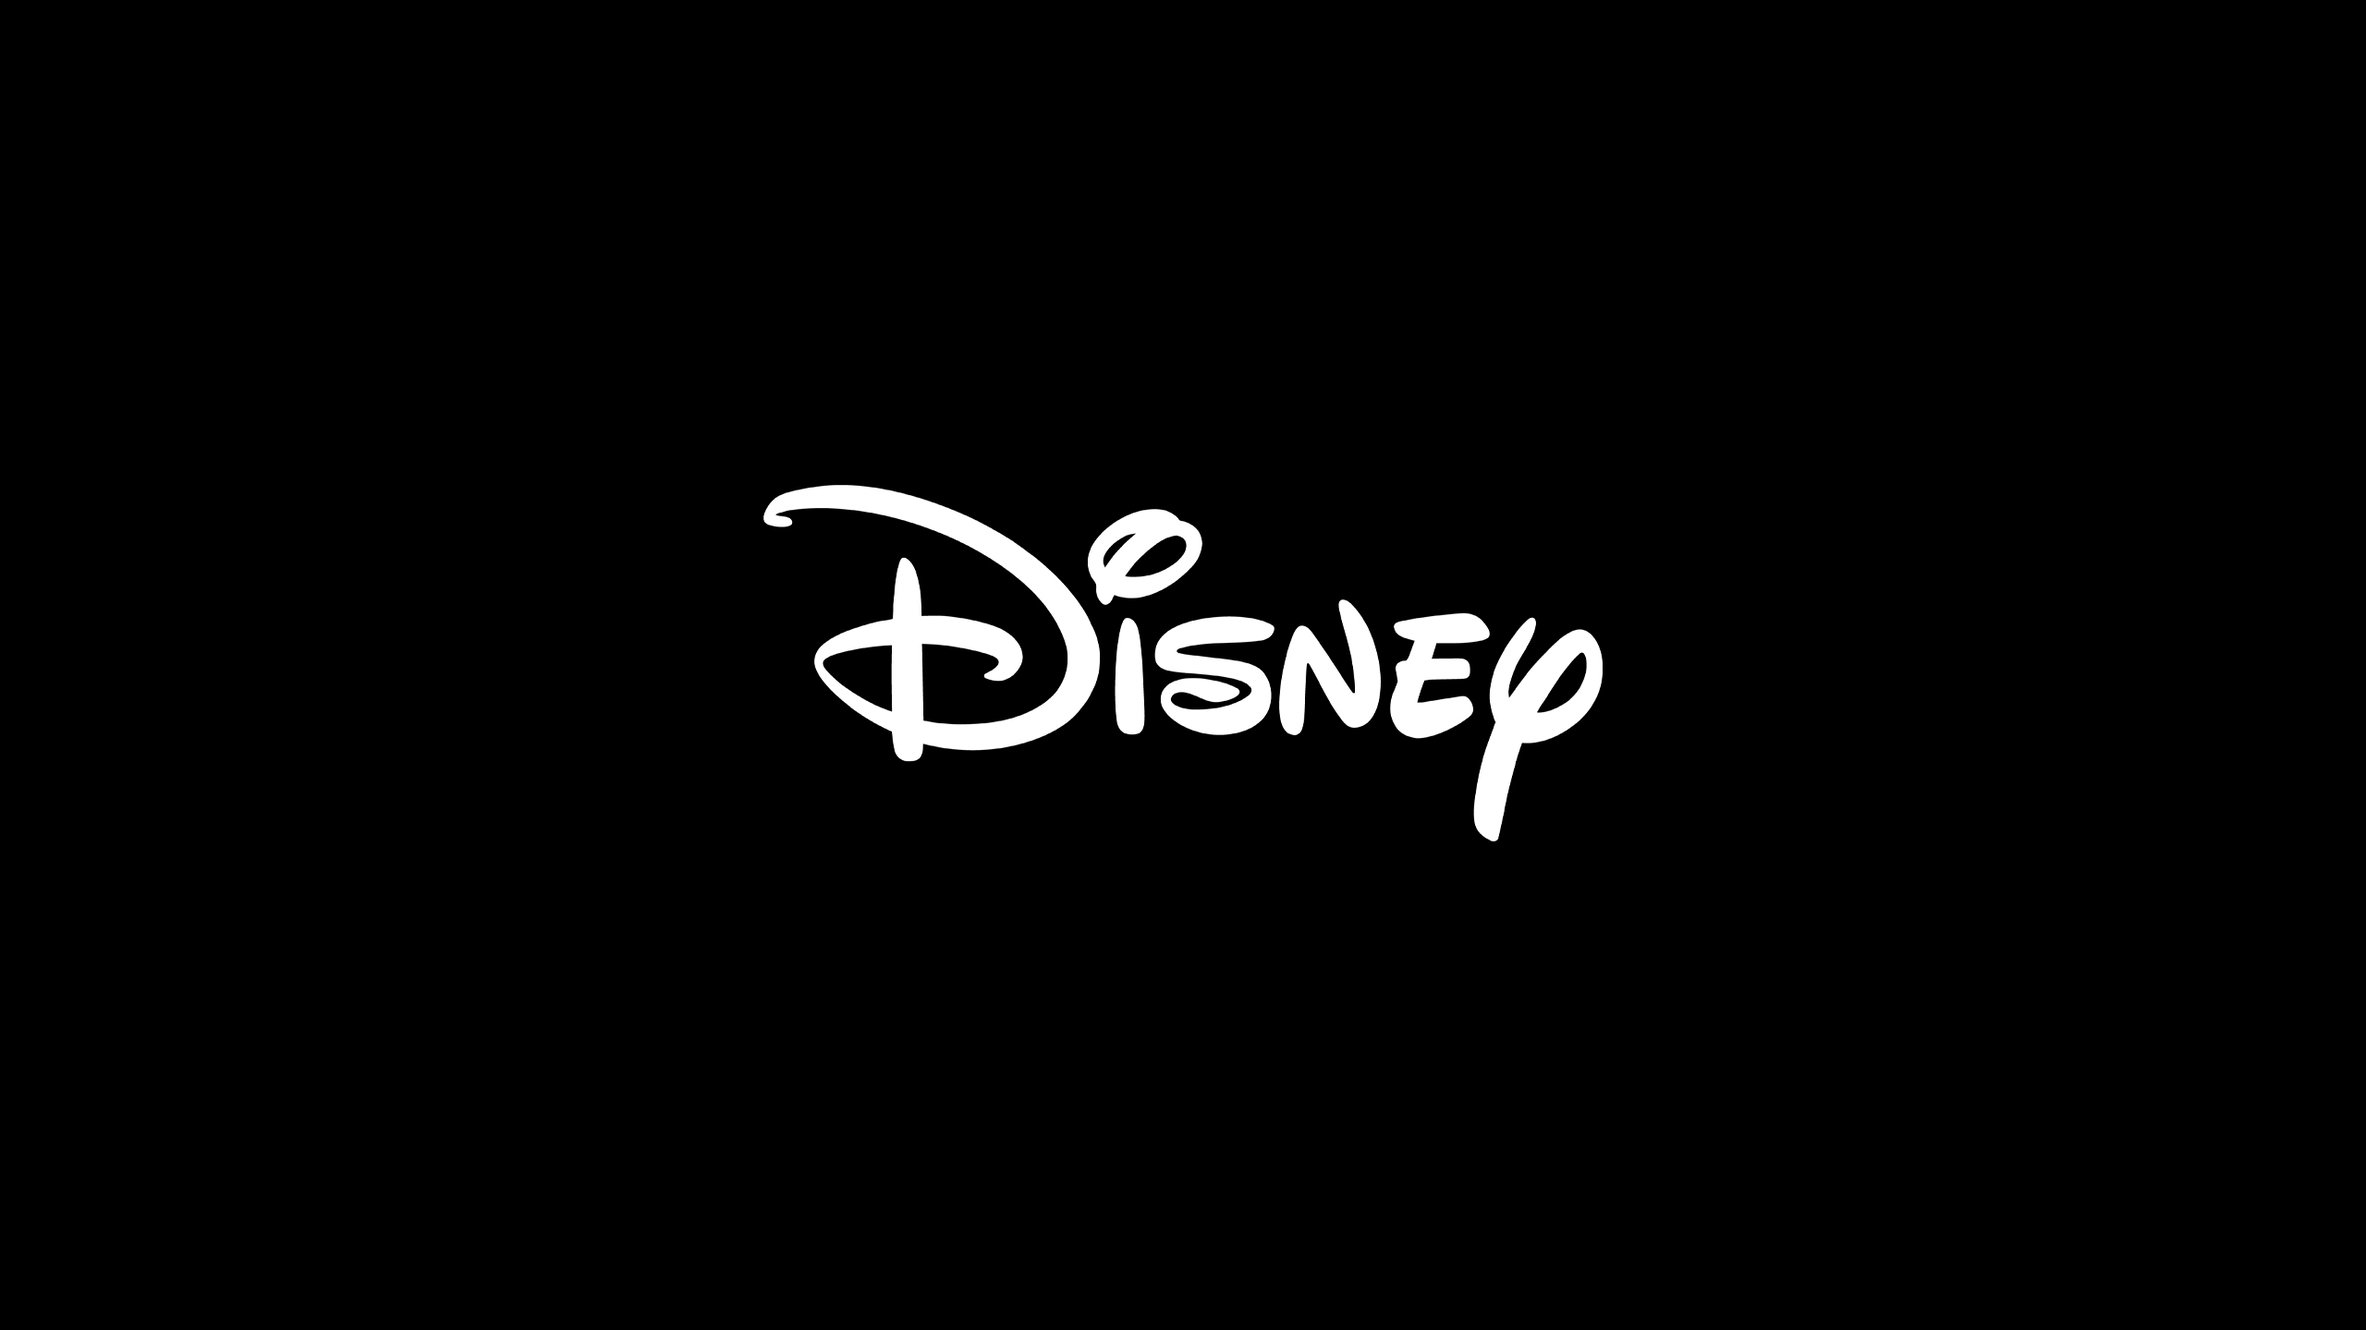 FX/Disney 'Class of 09' Featured Lawyers Casting Call